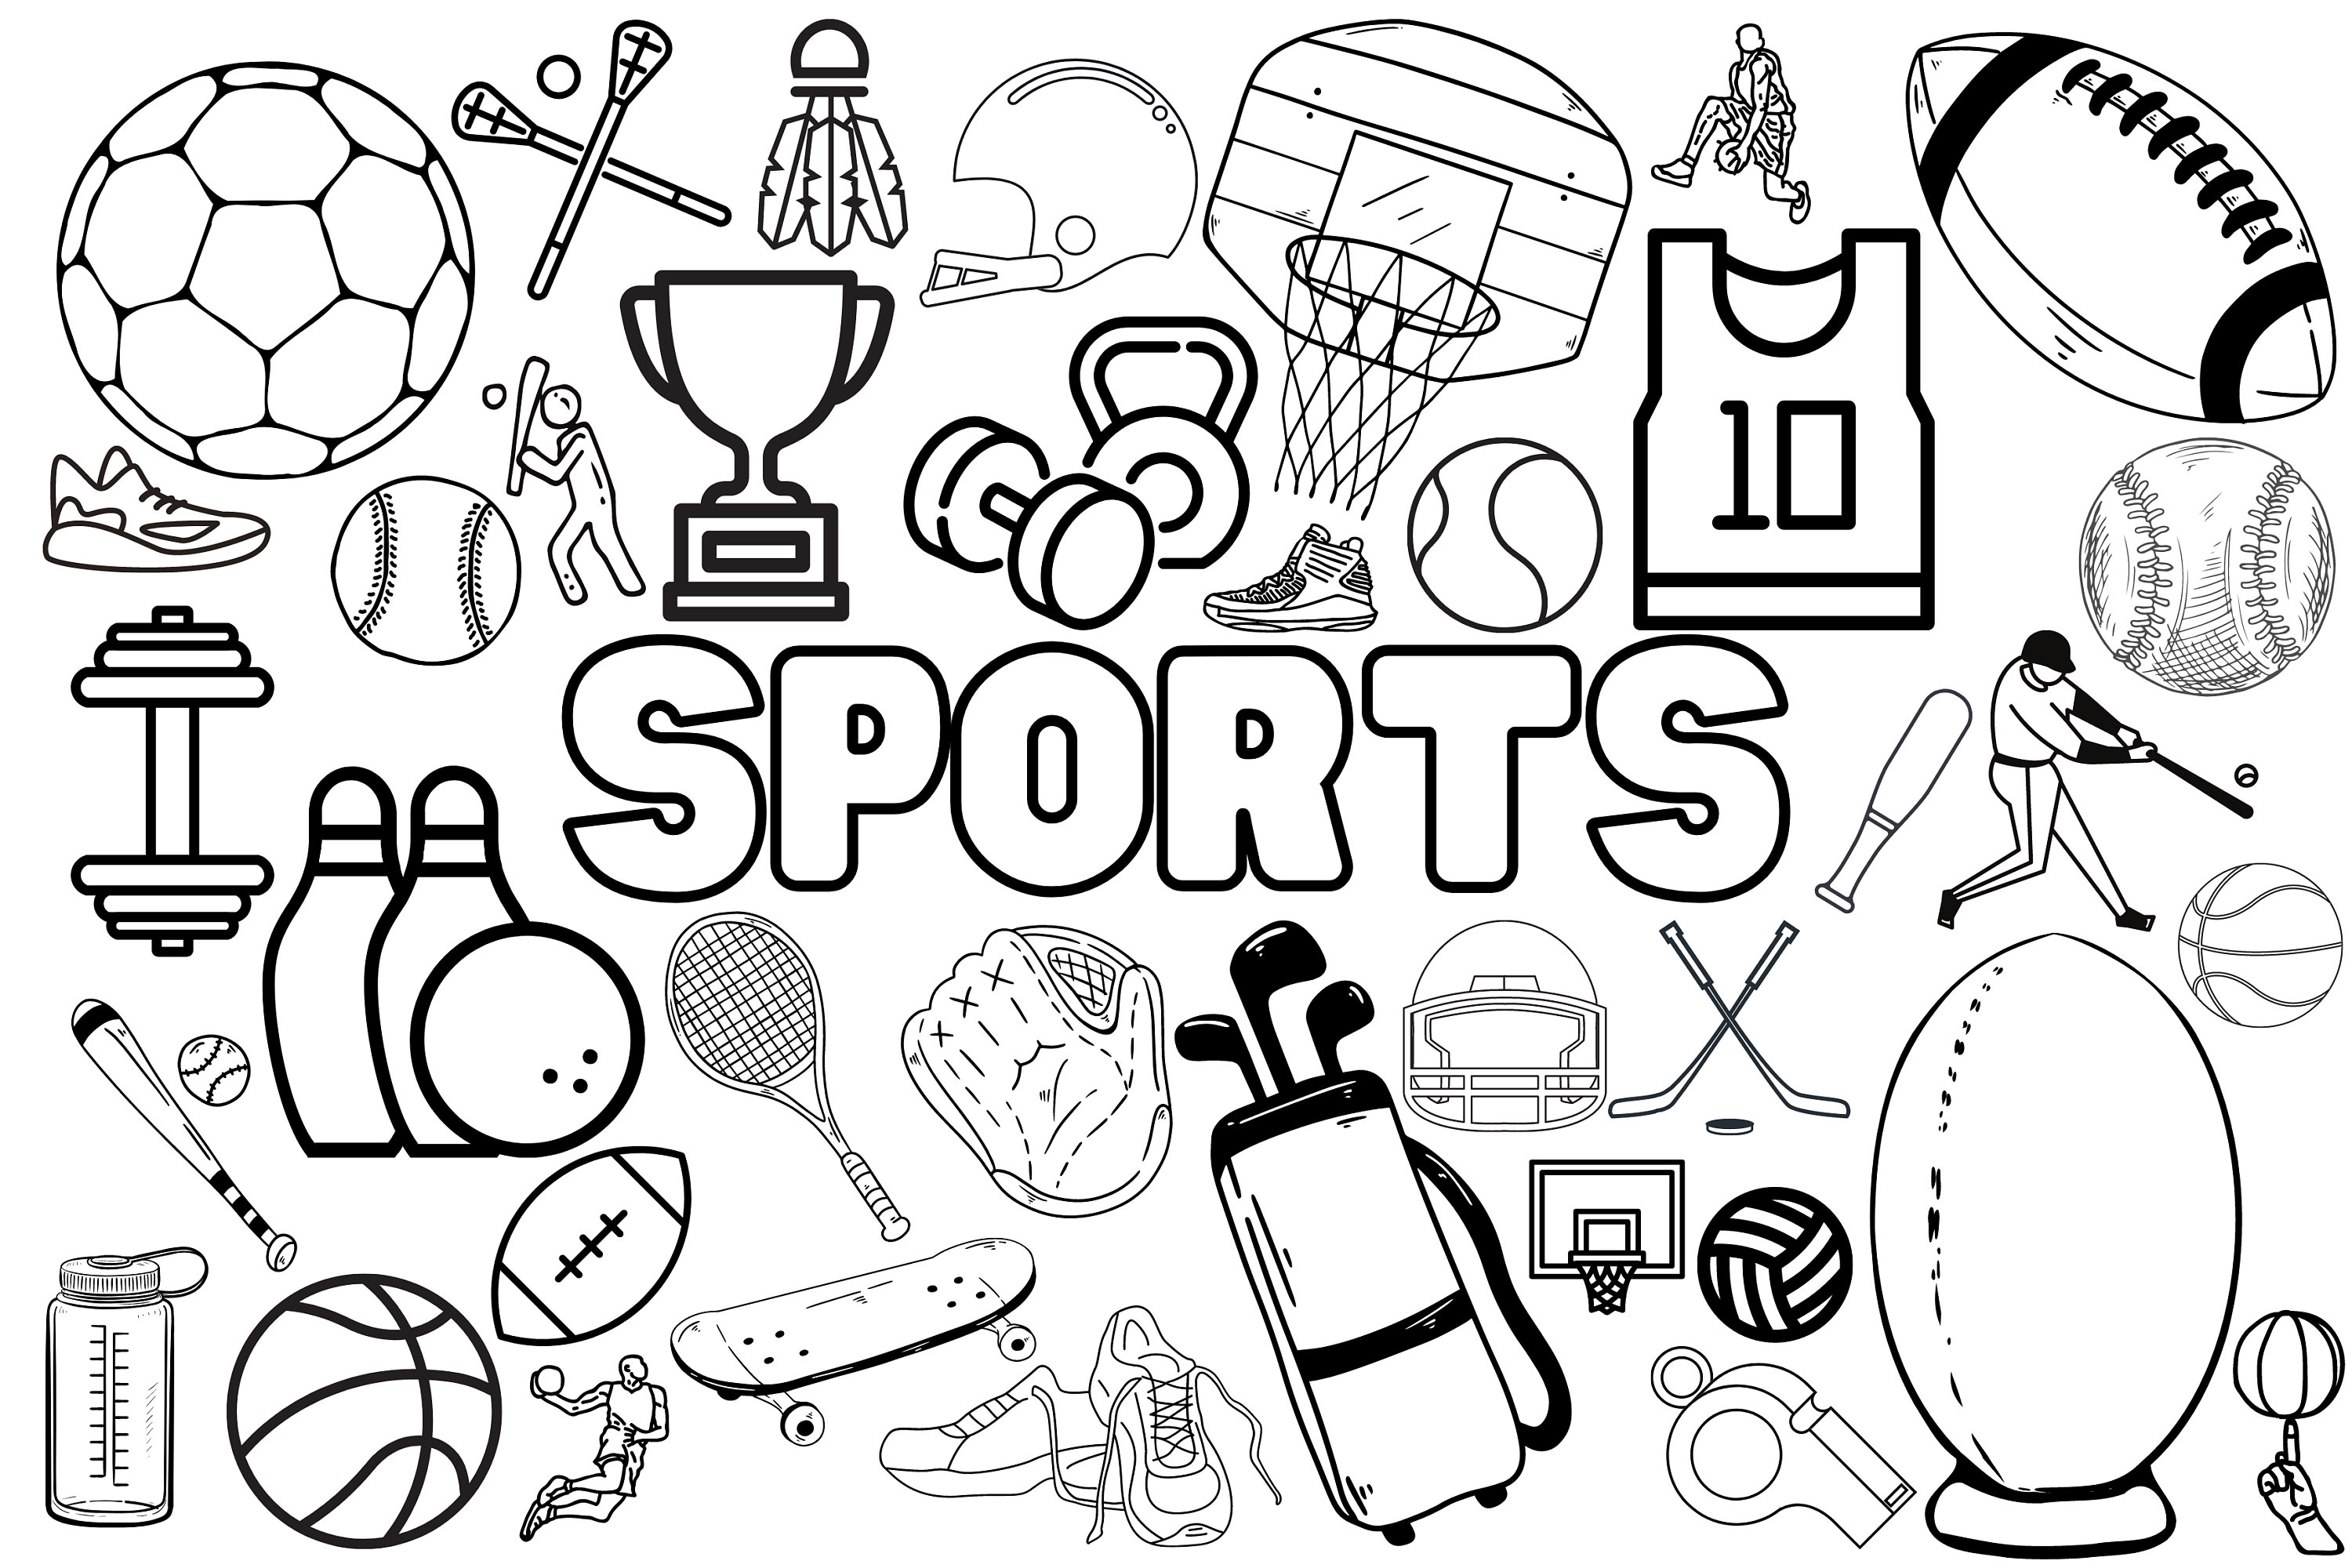 Huge sports coloring poster for kids adults great for family time girls boys arts and crafts senior care facilities schools